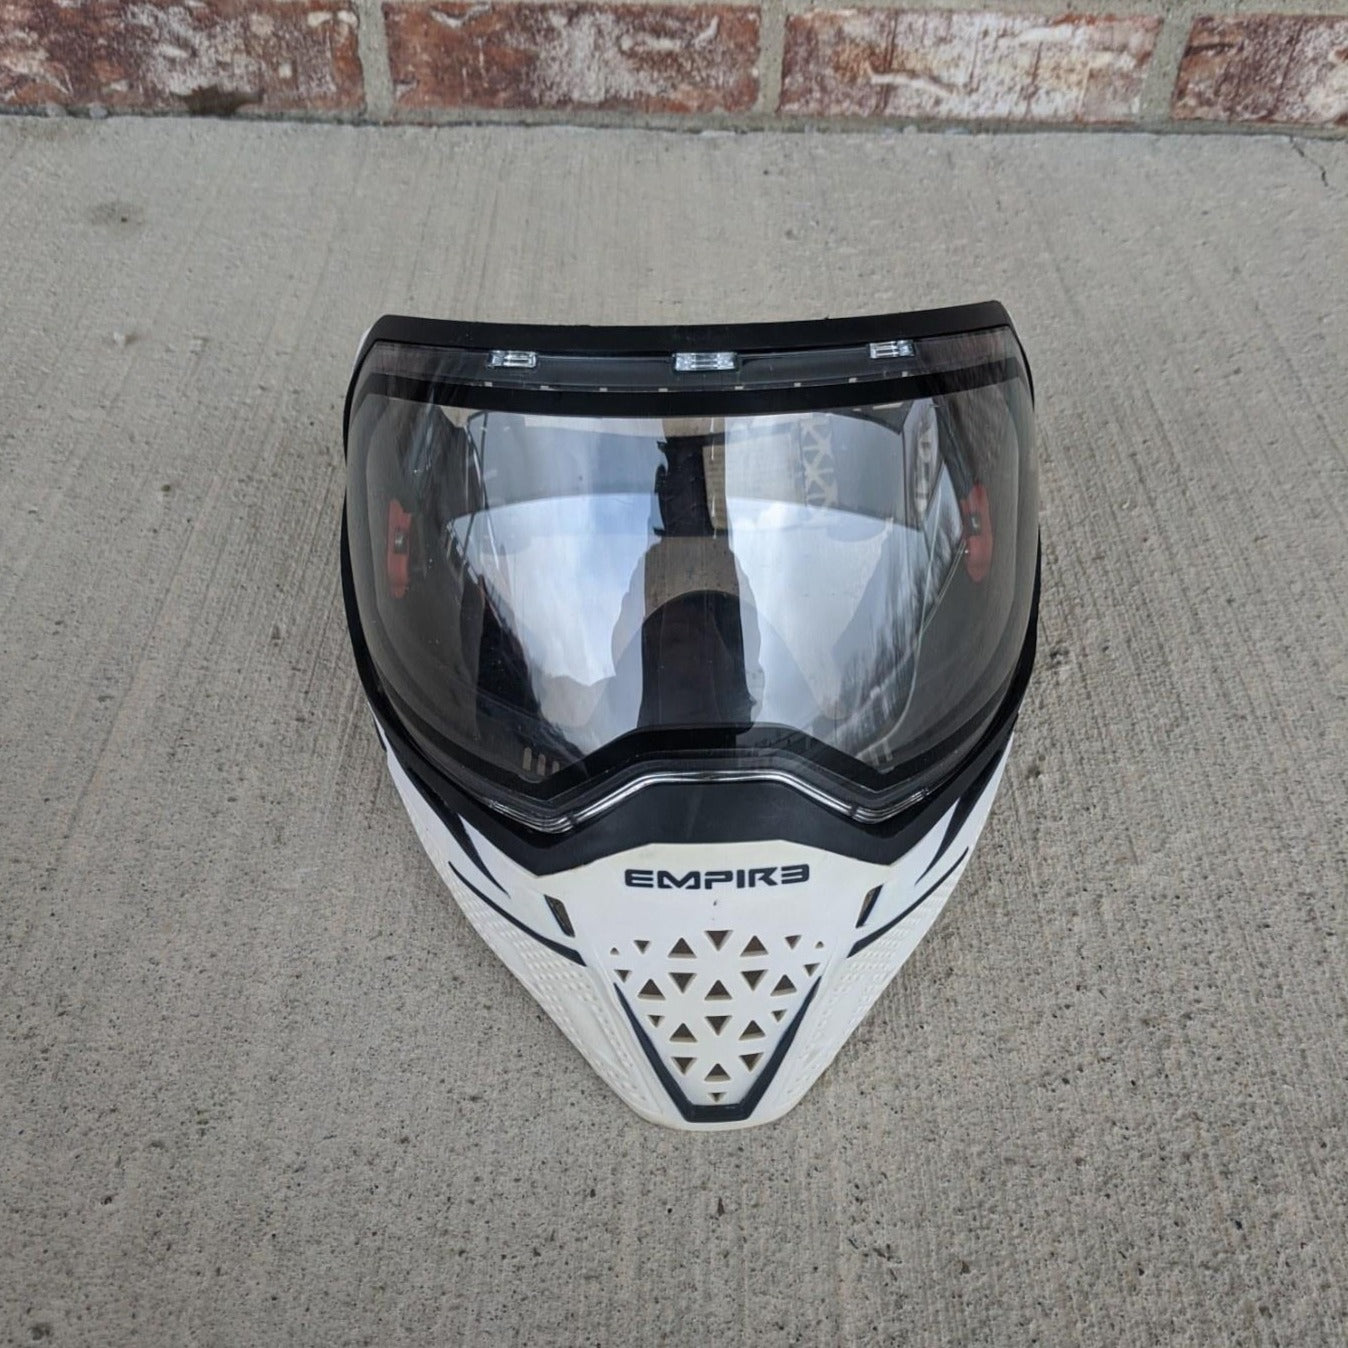 Used Empire EVS Paintball Mask - White